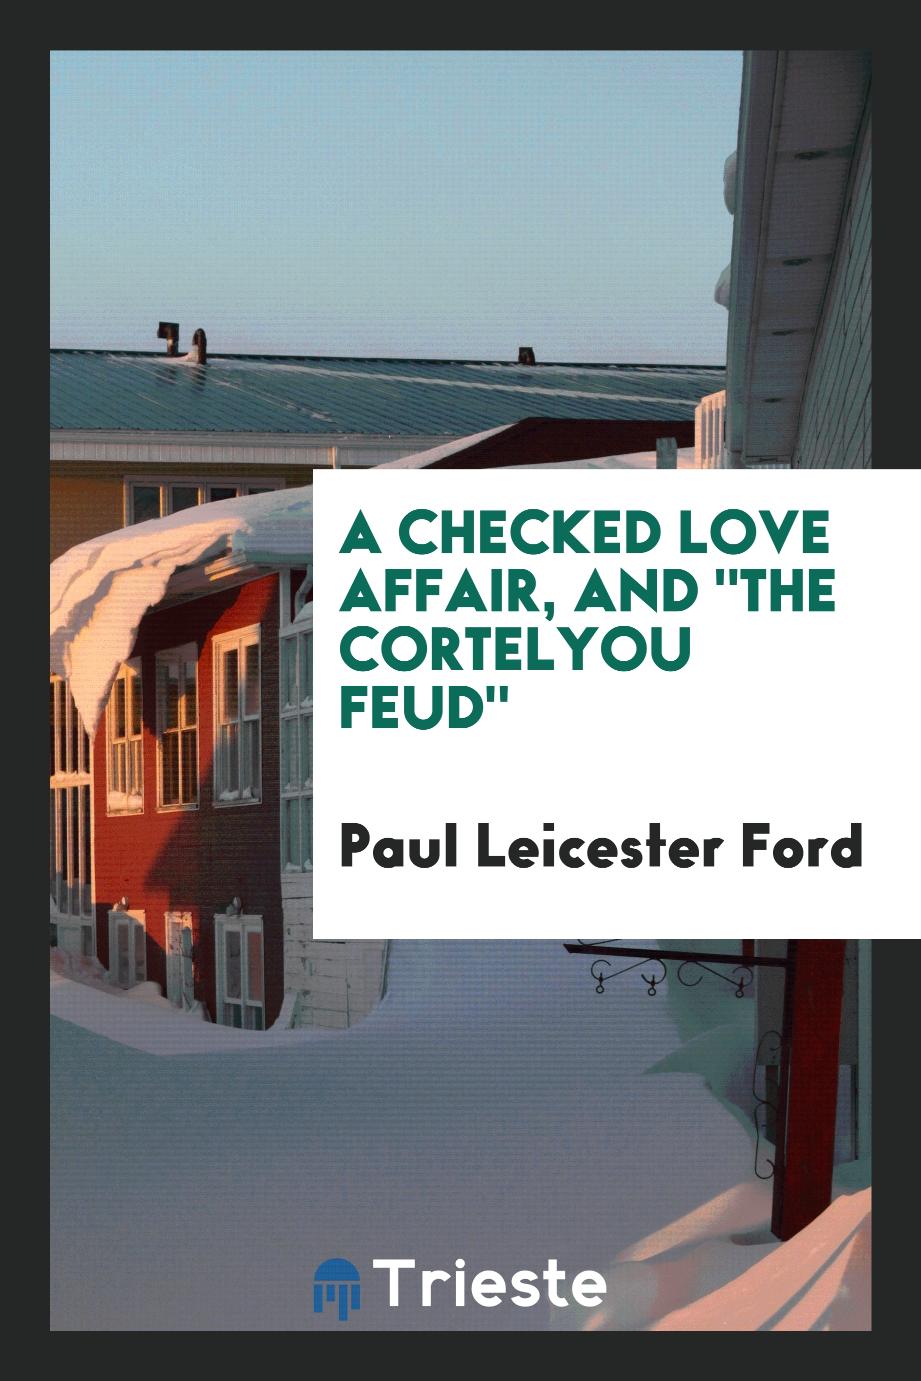 A Checked Love Affair, and "The Cortelyou Feud"